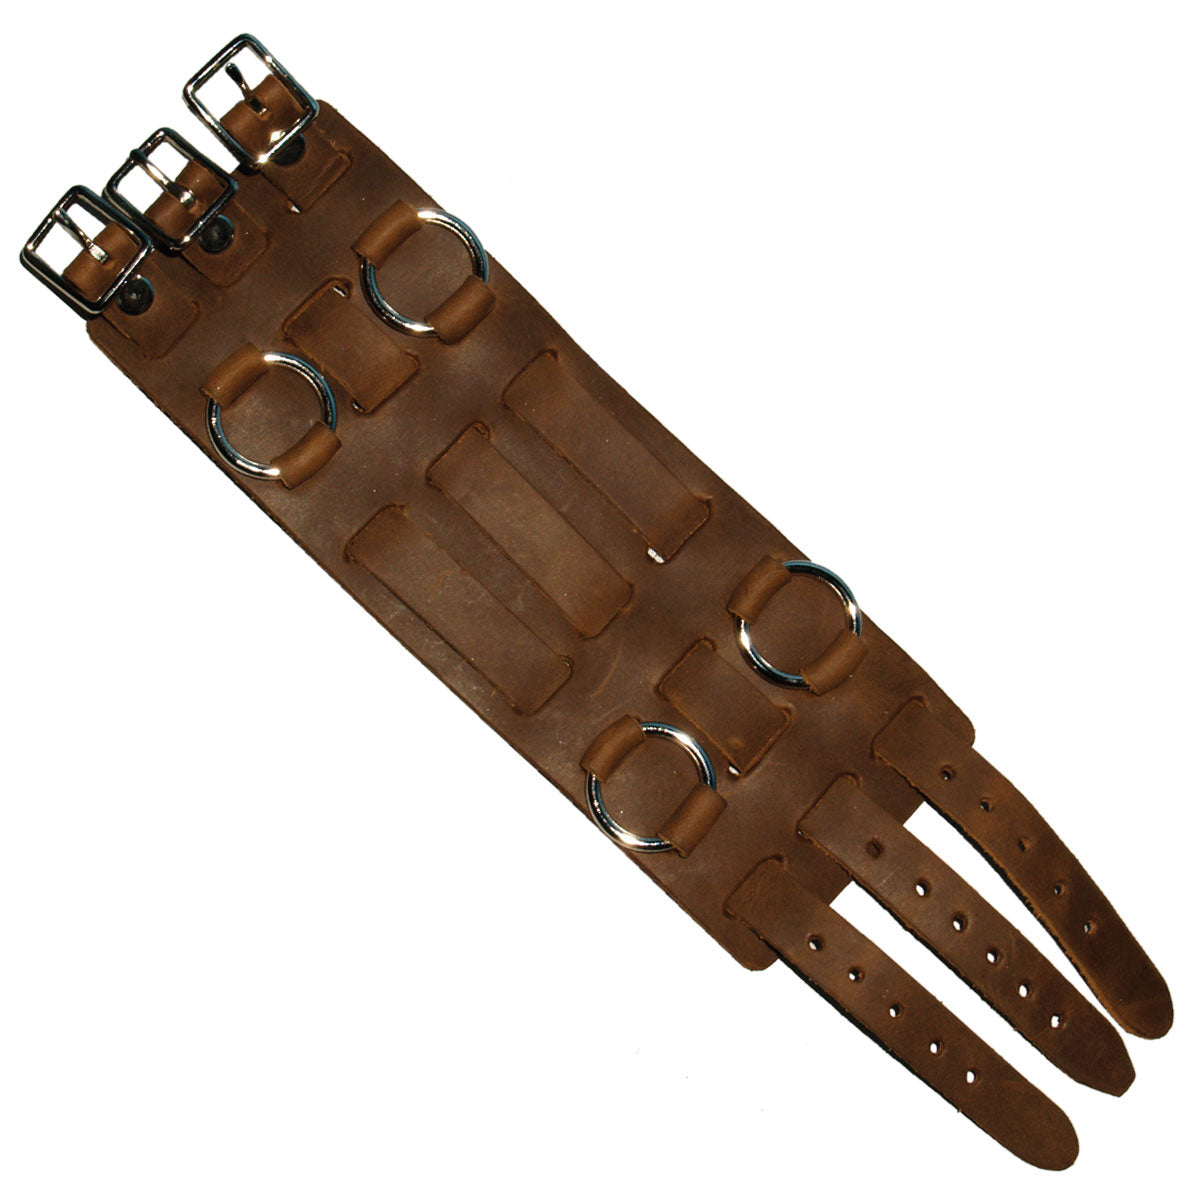 Hot Leathers WTB1002 2.5" 3-Strap Brown Leather Watchband